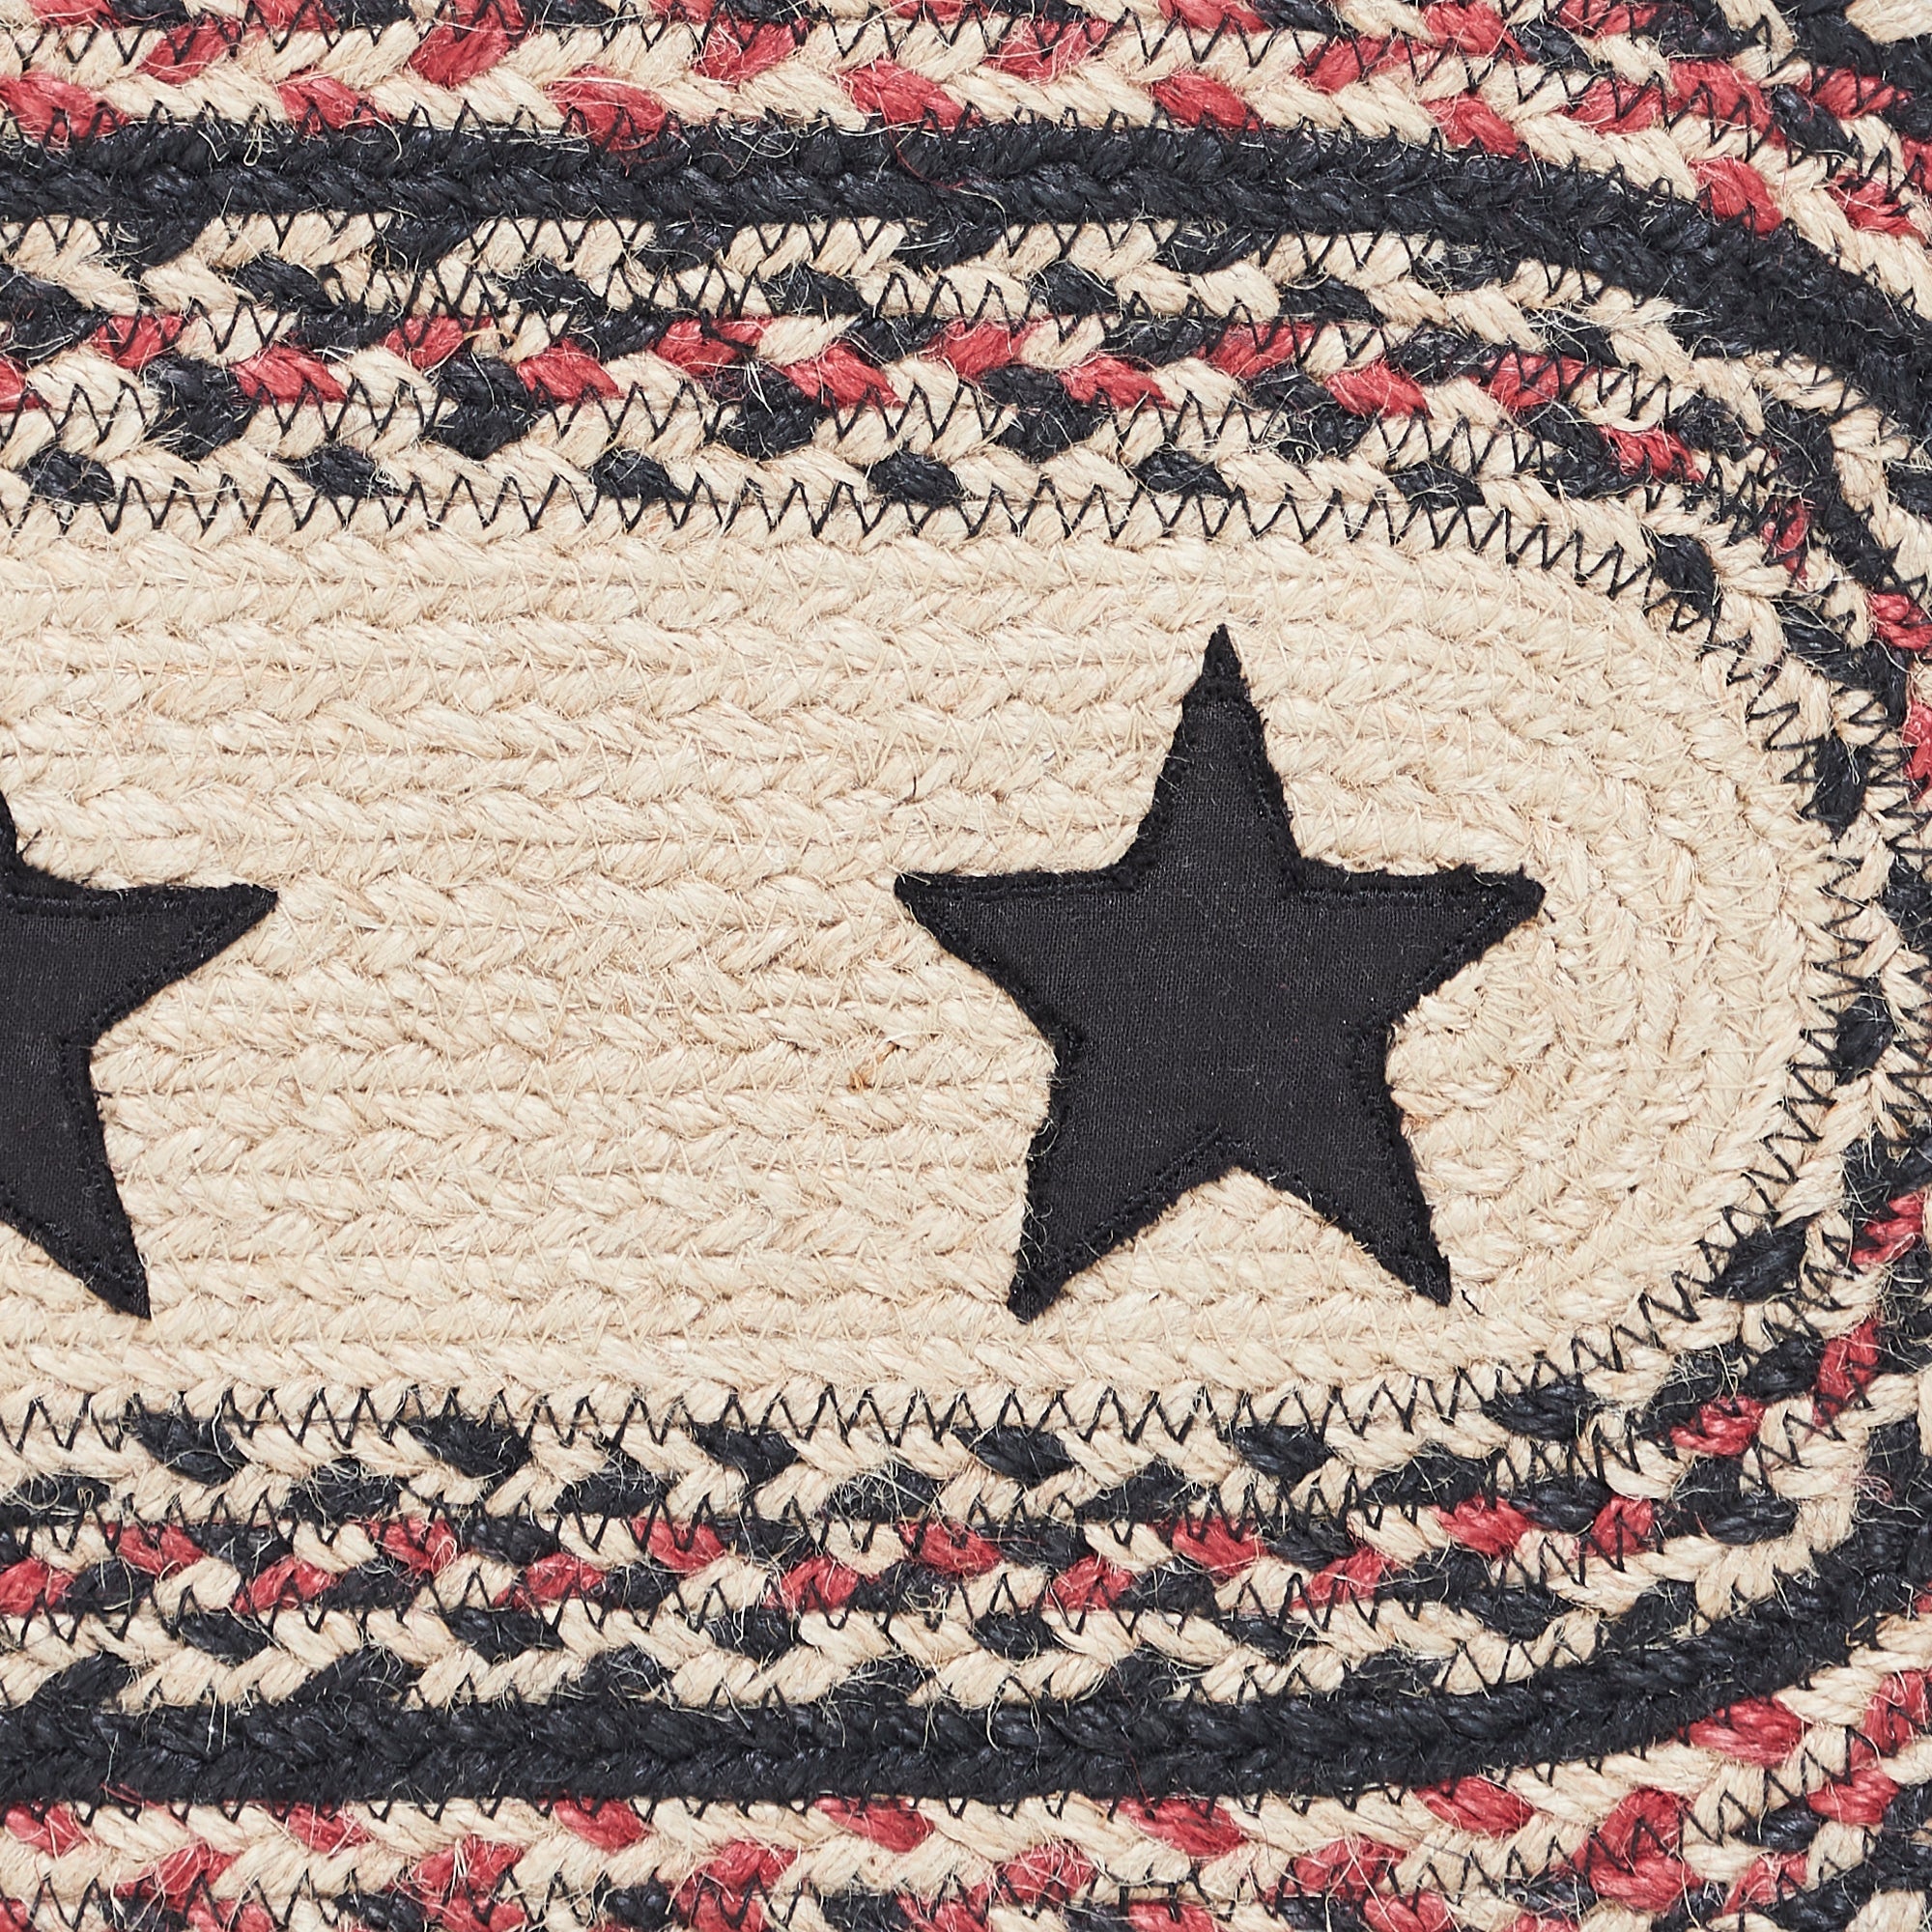 Colonial Star Jute Braided Oval Runner 13x72 VHC Brands